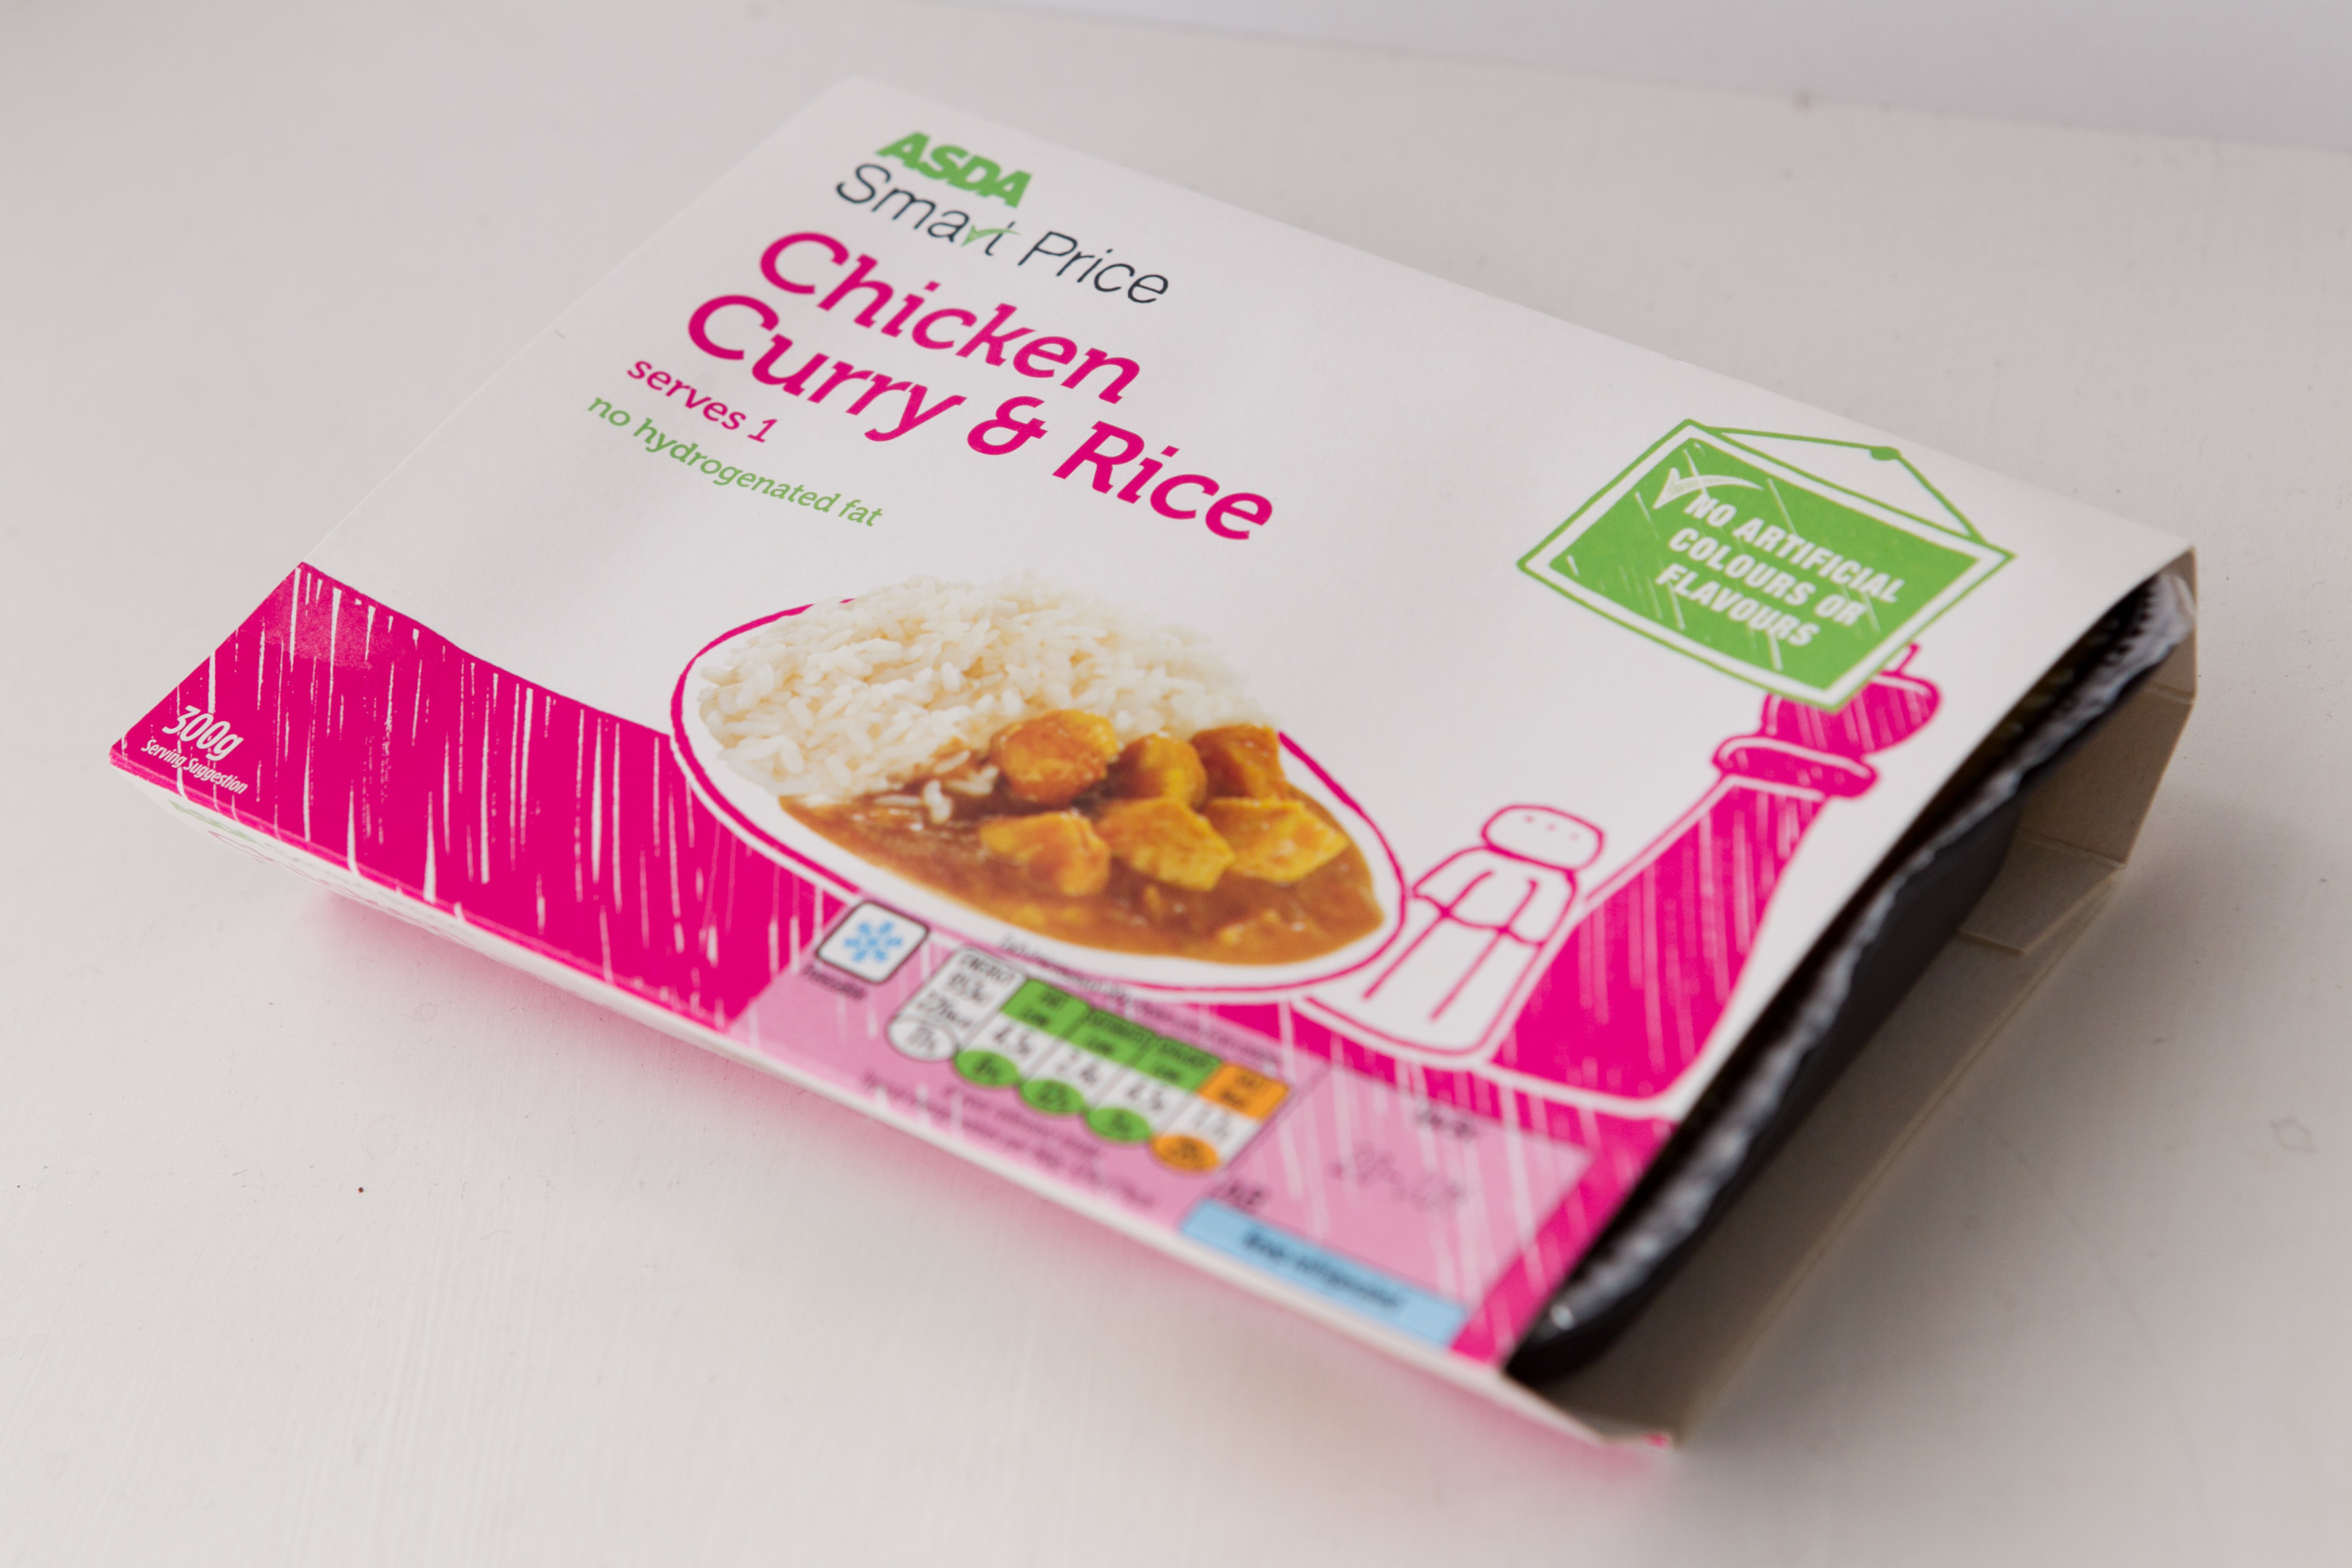 2/6/2016. Sunday Post. Andrew Cawley. Product shots of ready meals: Asda Chicken Curry and Rice.